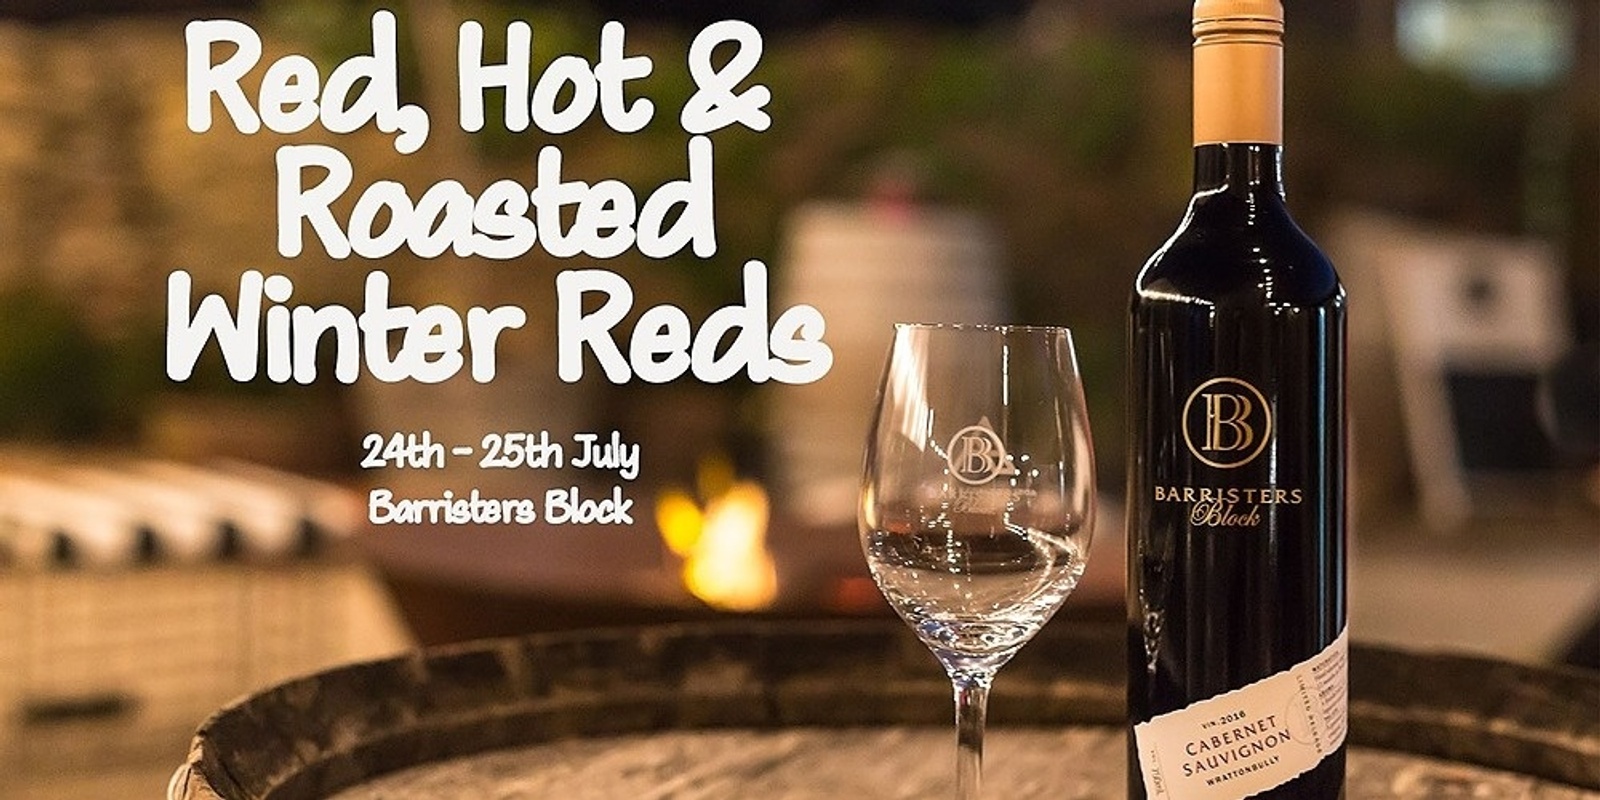 Banner image for Barristers Block Red Hot & Roasted